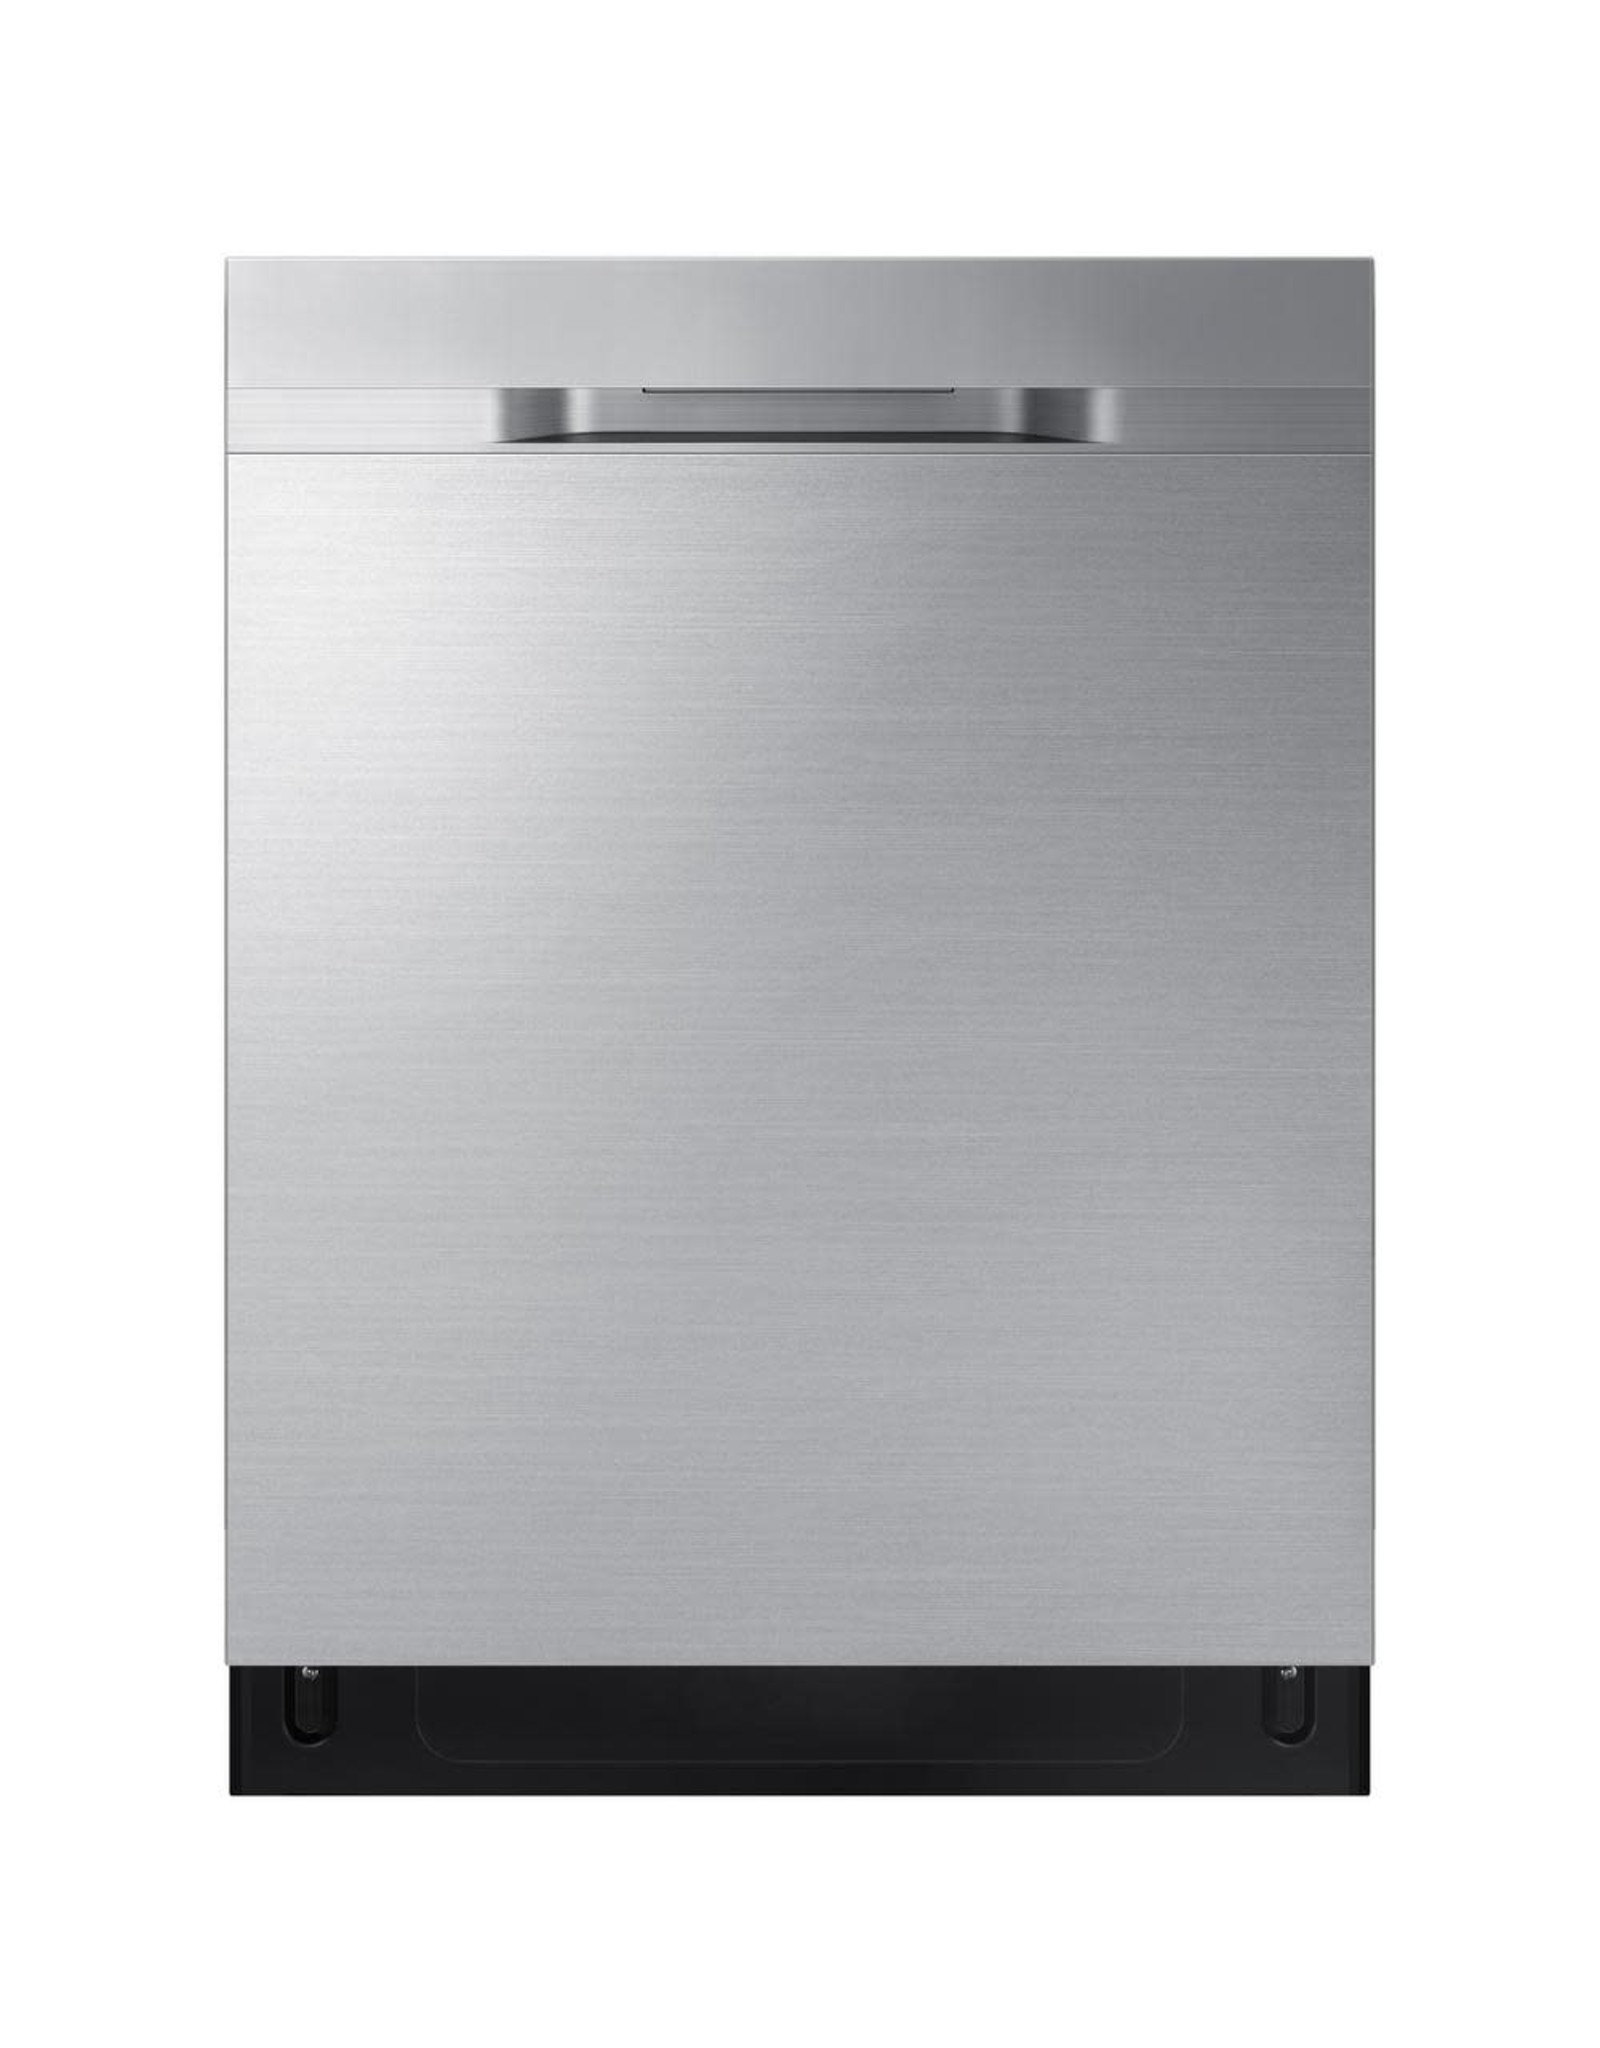 DW80R5060US24  in. Top Control Tall Tub Dishwasher in Fingerprint Resistant Stainless Steel with AutoRelease, 3rd Rack, 48 dBA